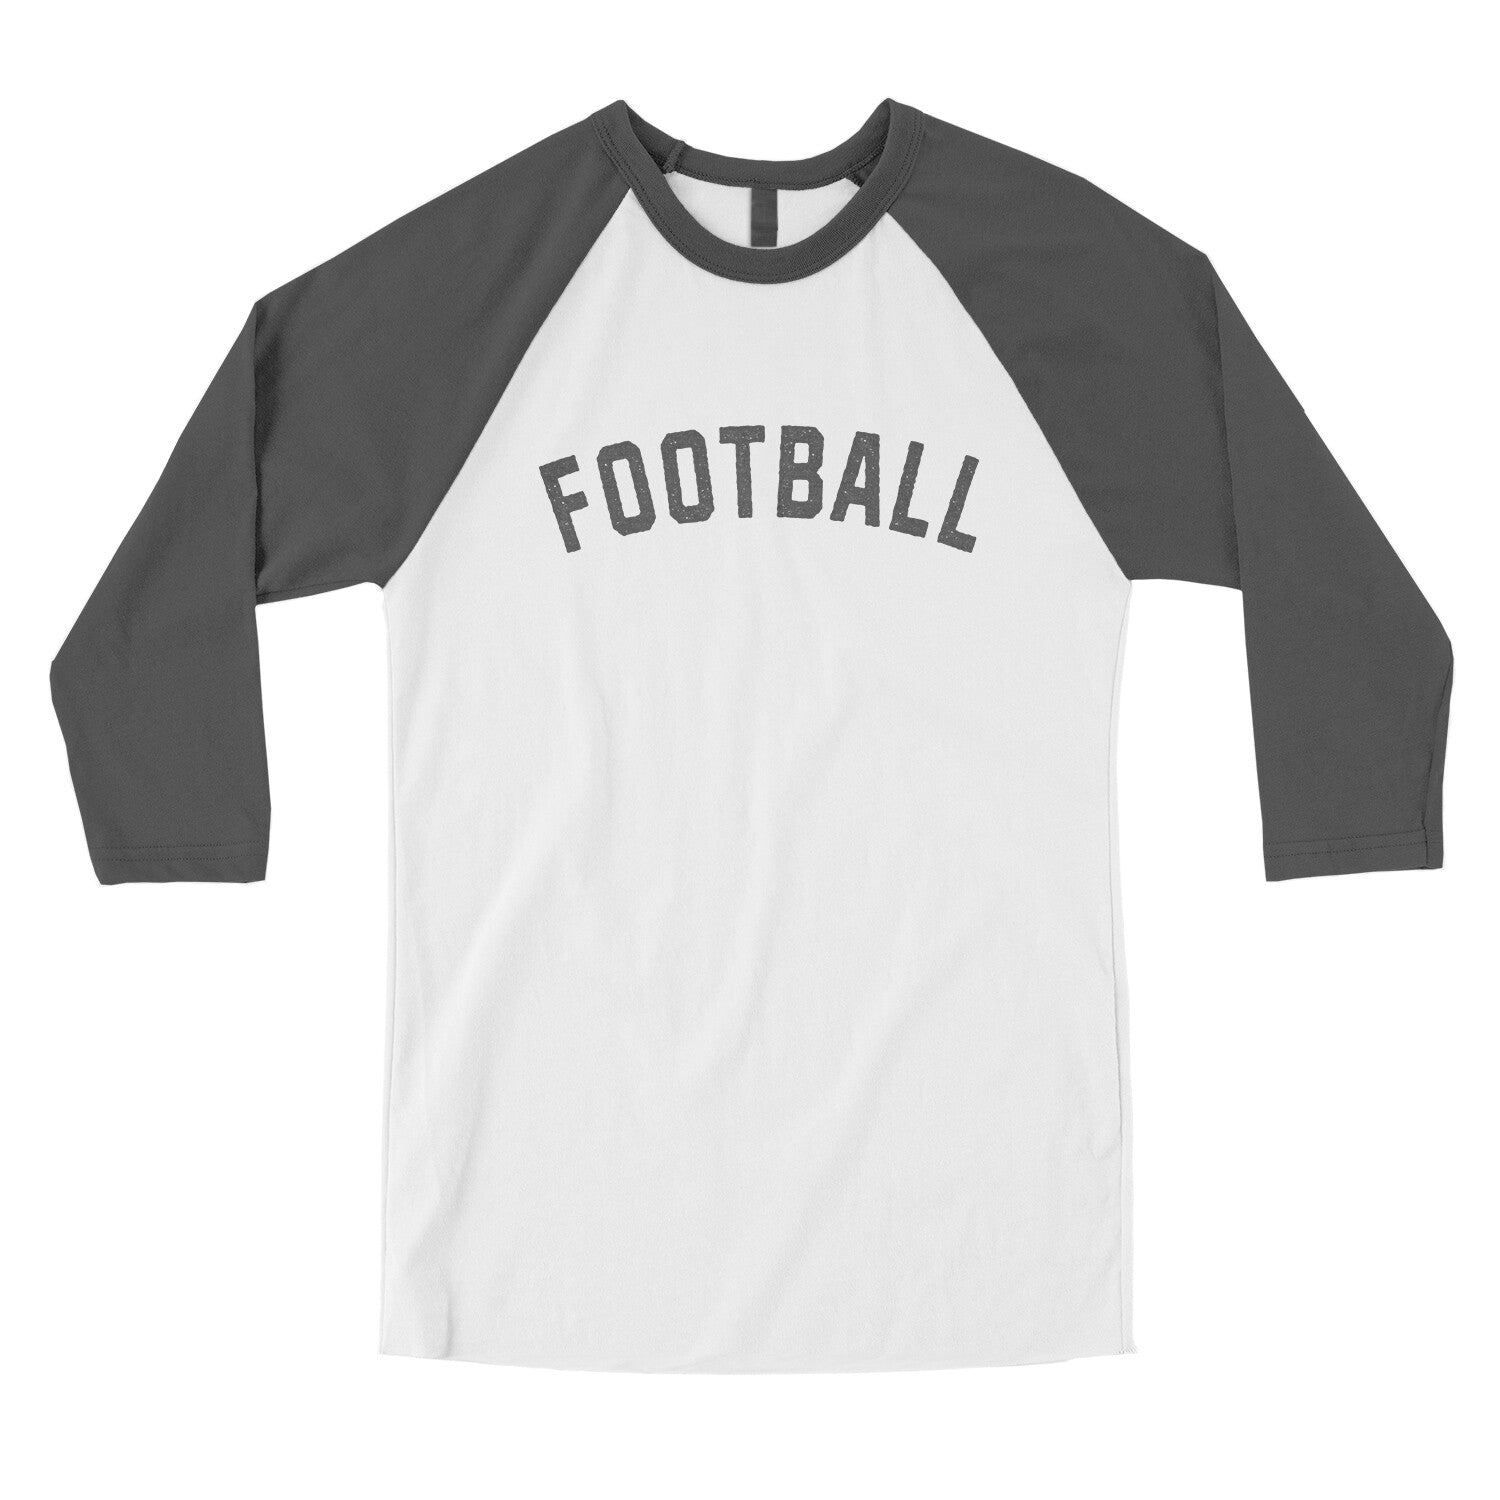 Football in White with Asphalt Color